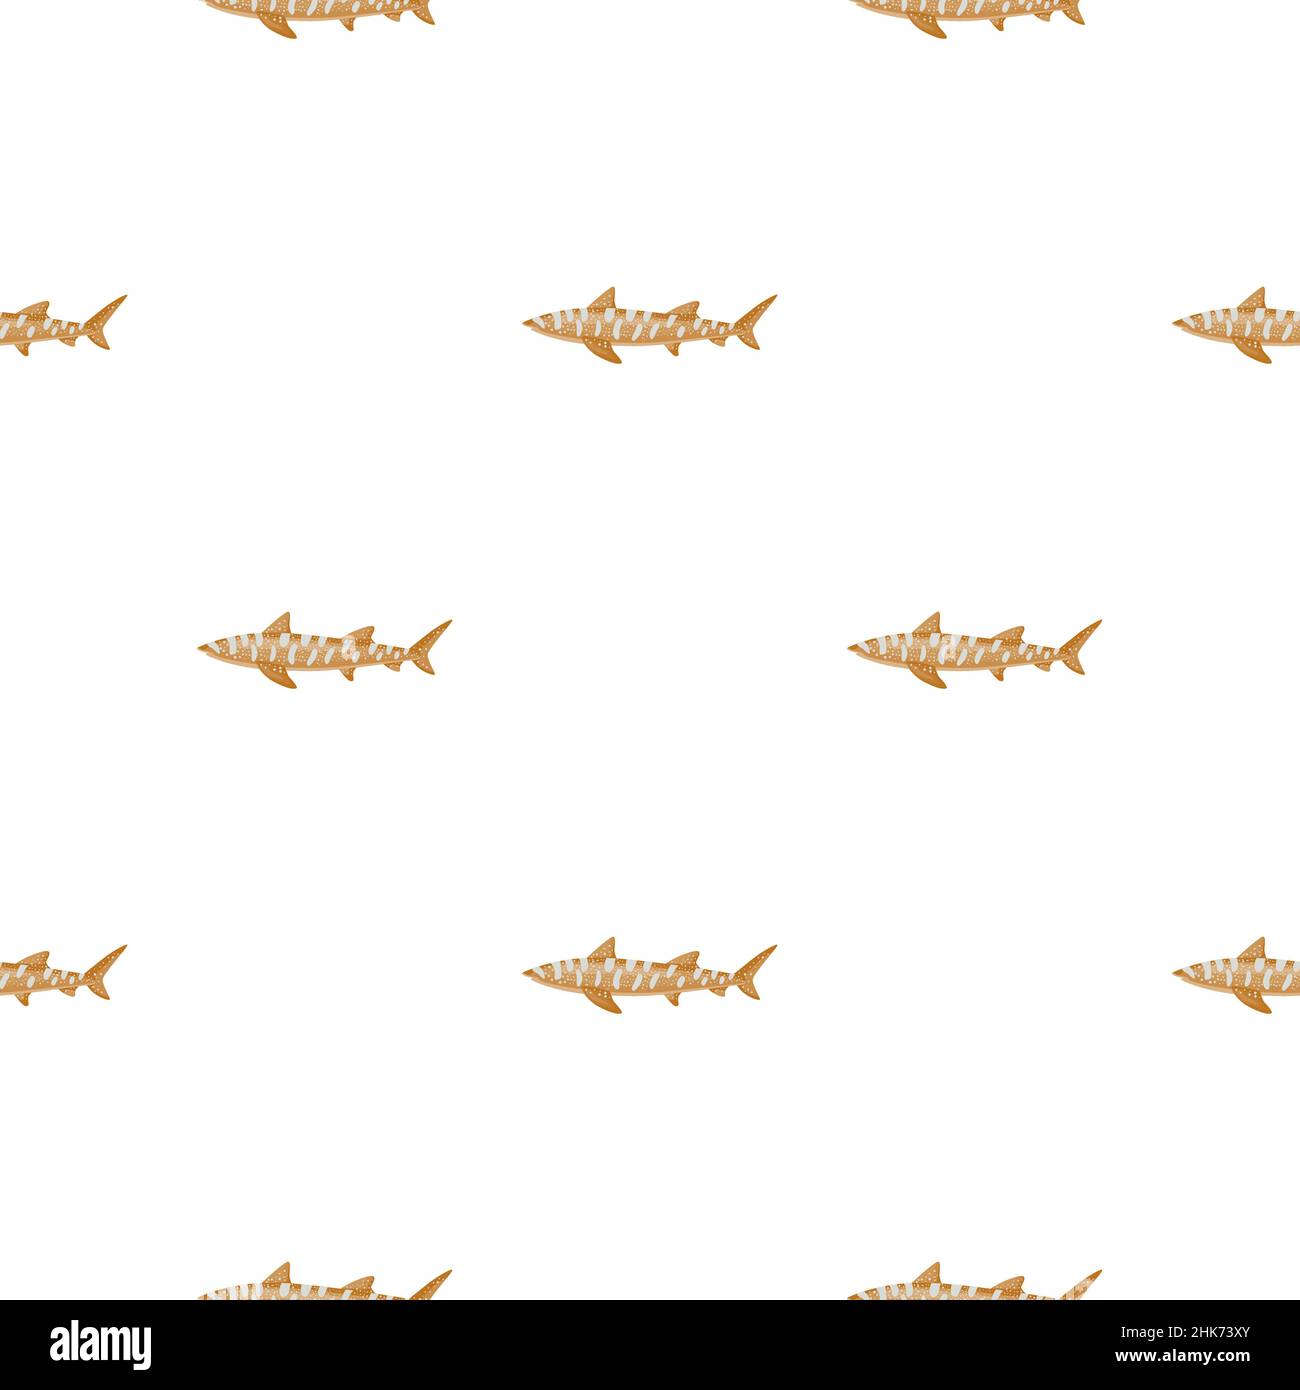 Leopard shark seamless pattern in scandinavian style. Marine animals background. Vector illustration for children funny textile prints, fabric, banner Stock Vector